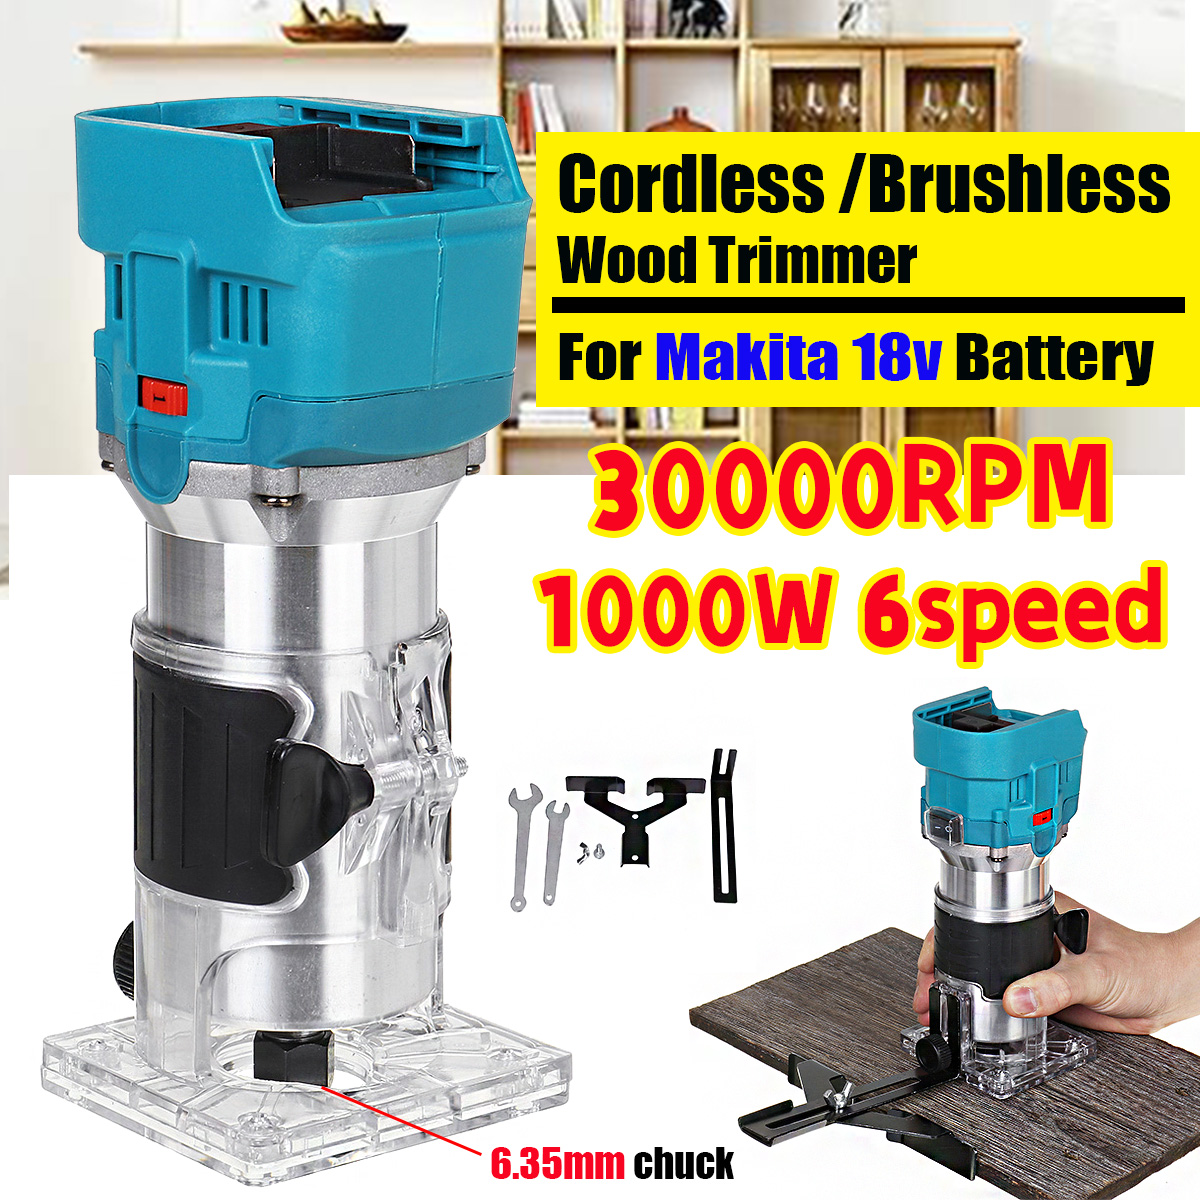 1000W-6-Speed-Brushless-Electric-Wood-Trimmer-Router-635mm-Steel-Chuck-For-Wood-Chamfering-Grooving--1840159-2